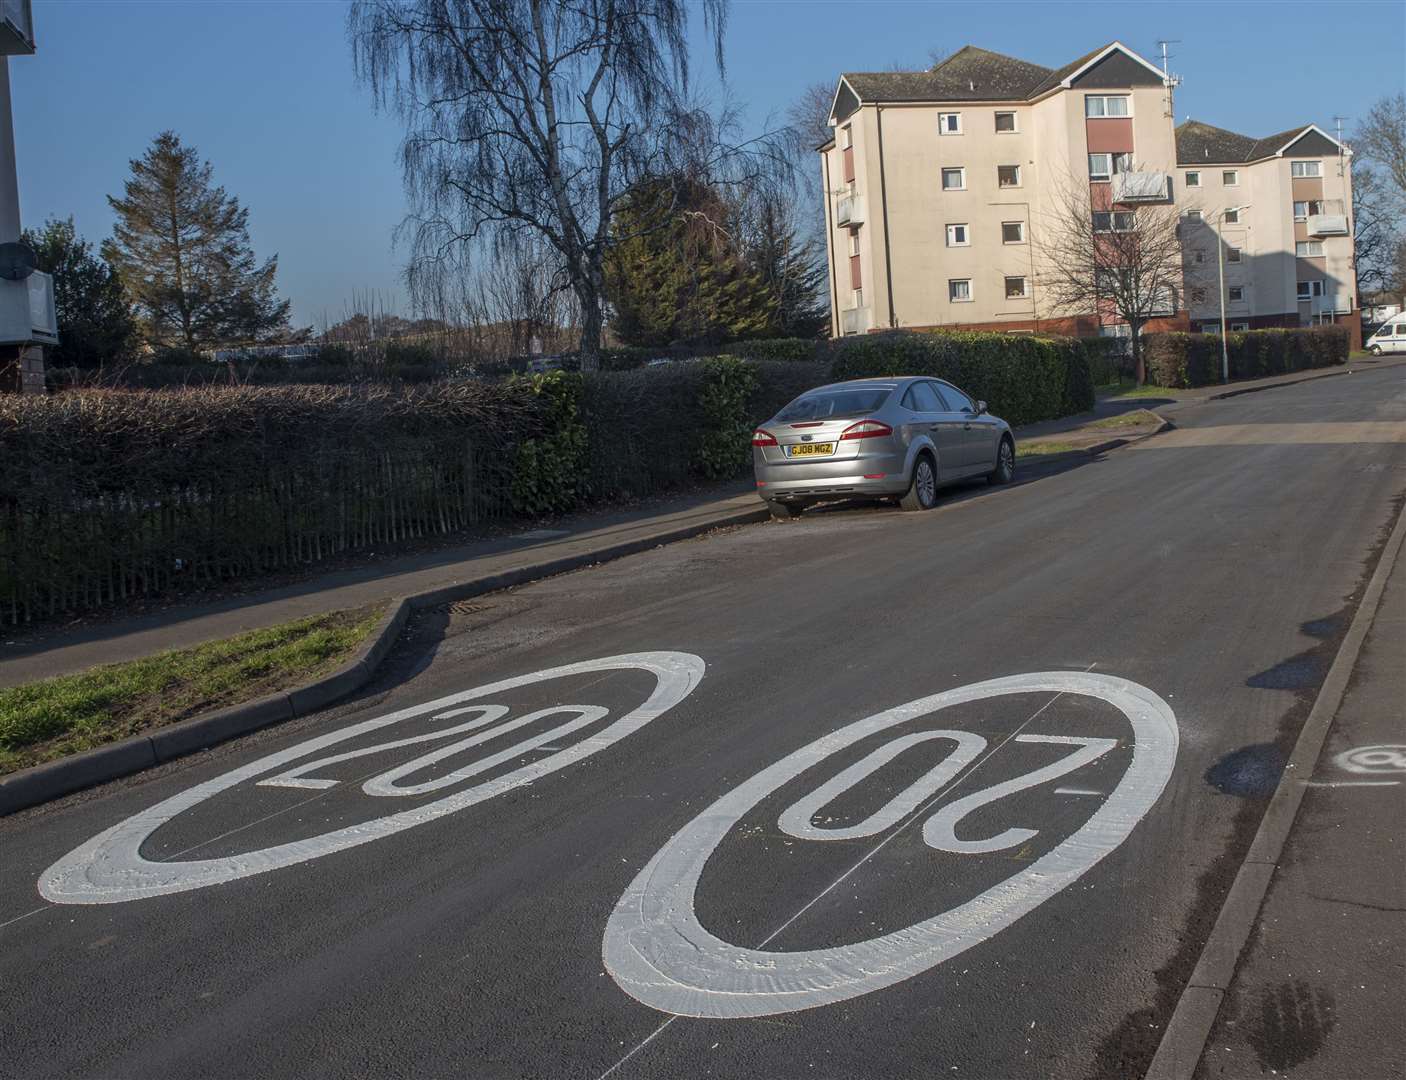 20mph limits have been painted on dozens of roads in the Kennington area. Picture: Ellie Crook